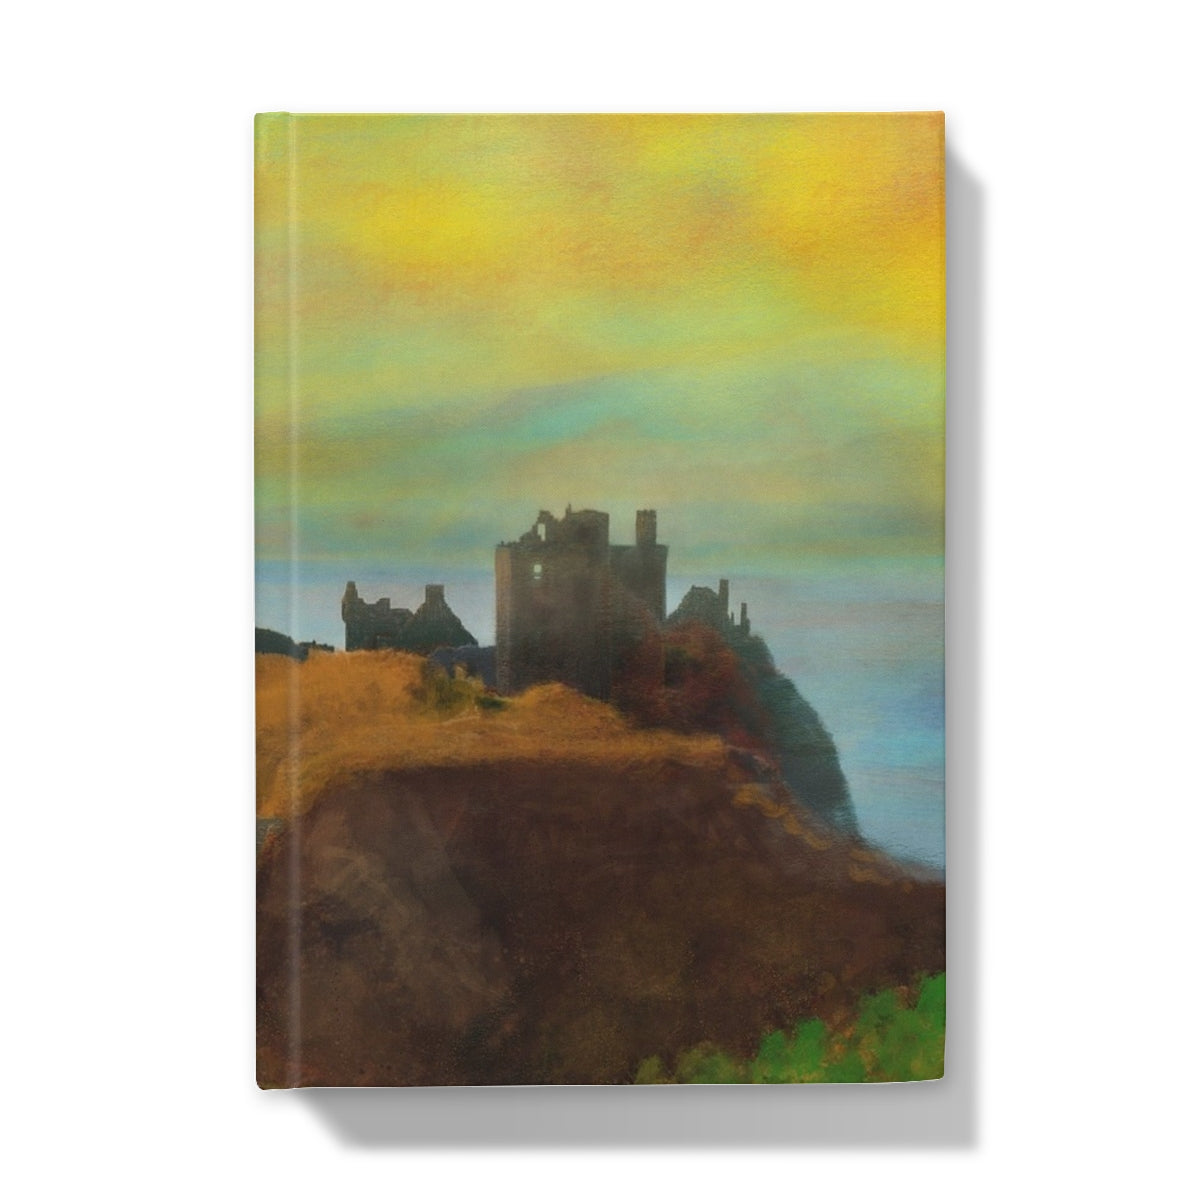 Dunnottar Castle Art Gifts Hardback Journal-Journals & Notebooks-Historic & Iconic Scotland Art Gallery-A4-Plain-Paintings, Prints, Homeware, Art Gifts From Scotland By Scottish Artist Kevin Hunter